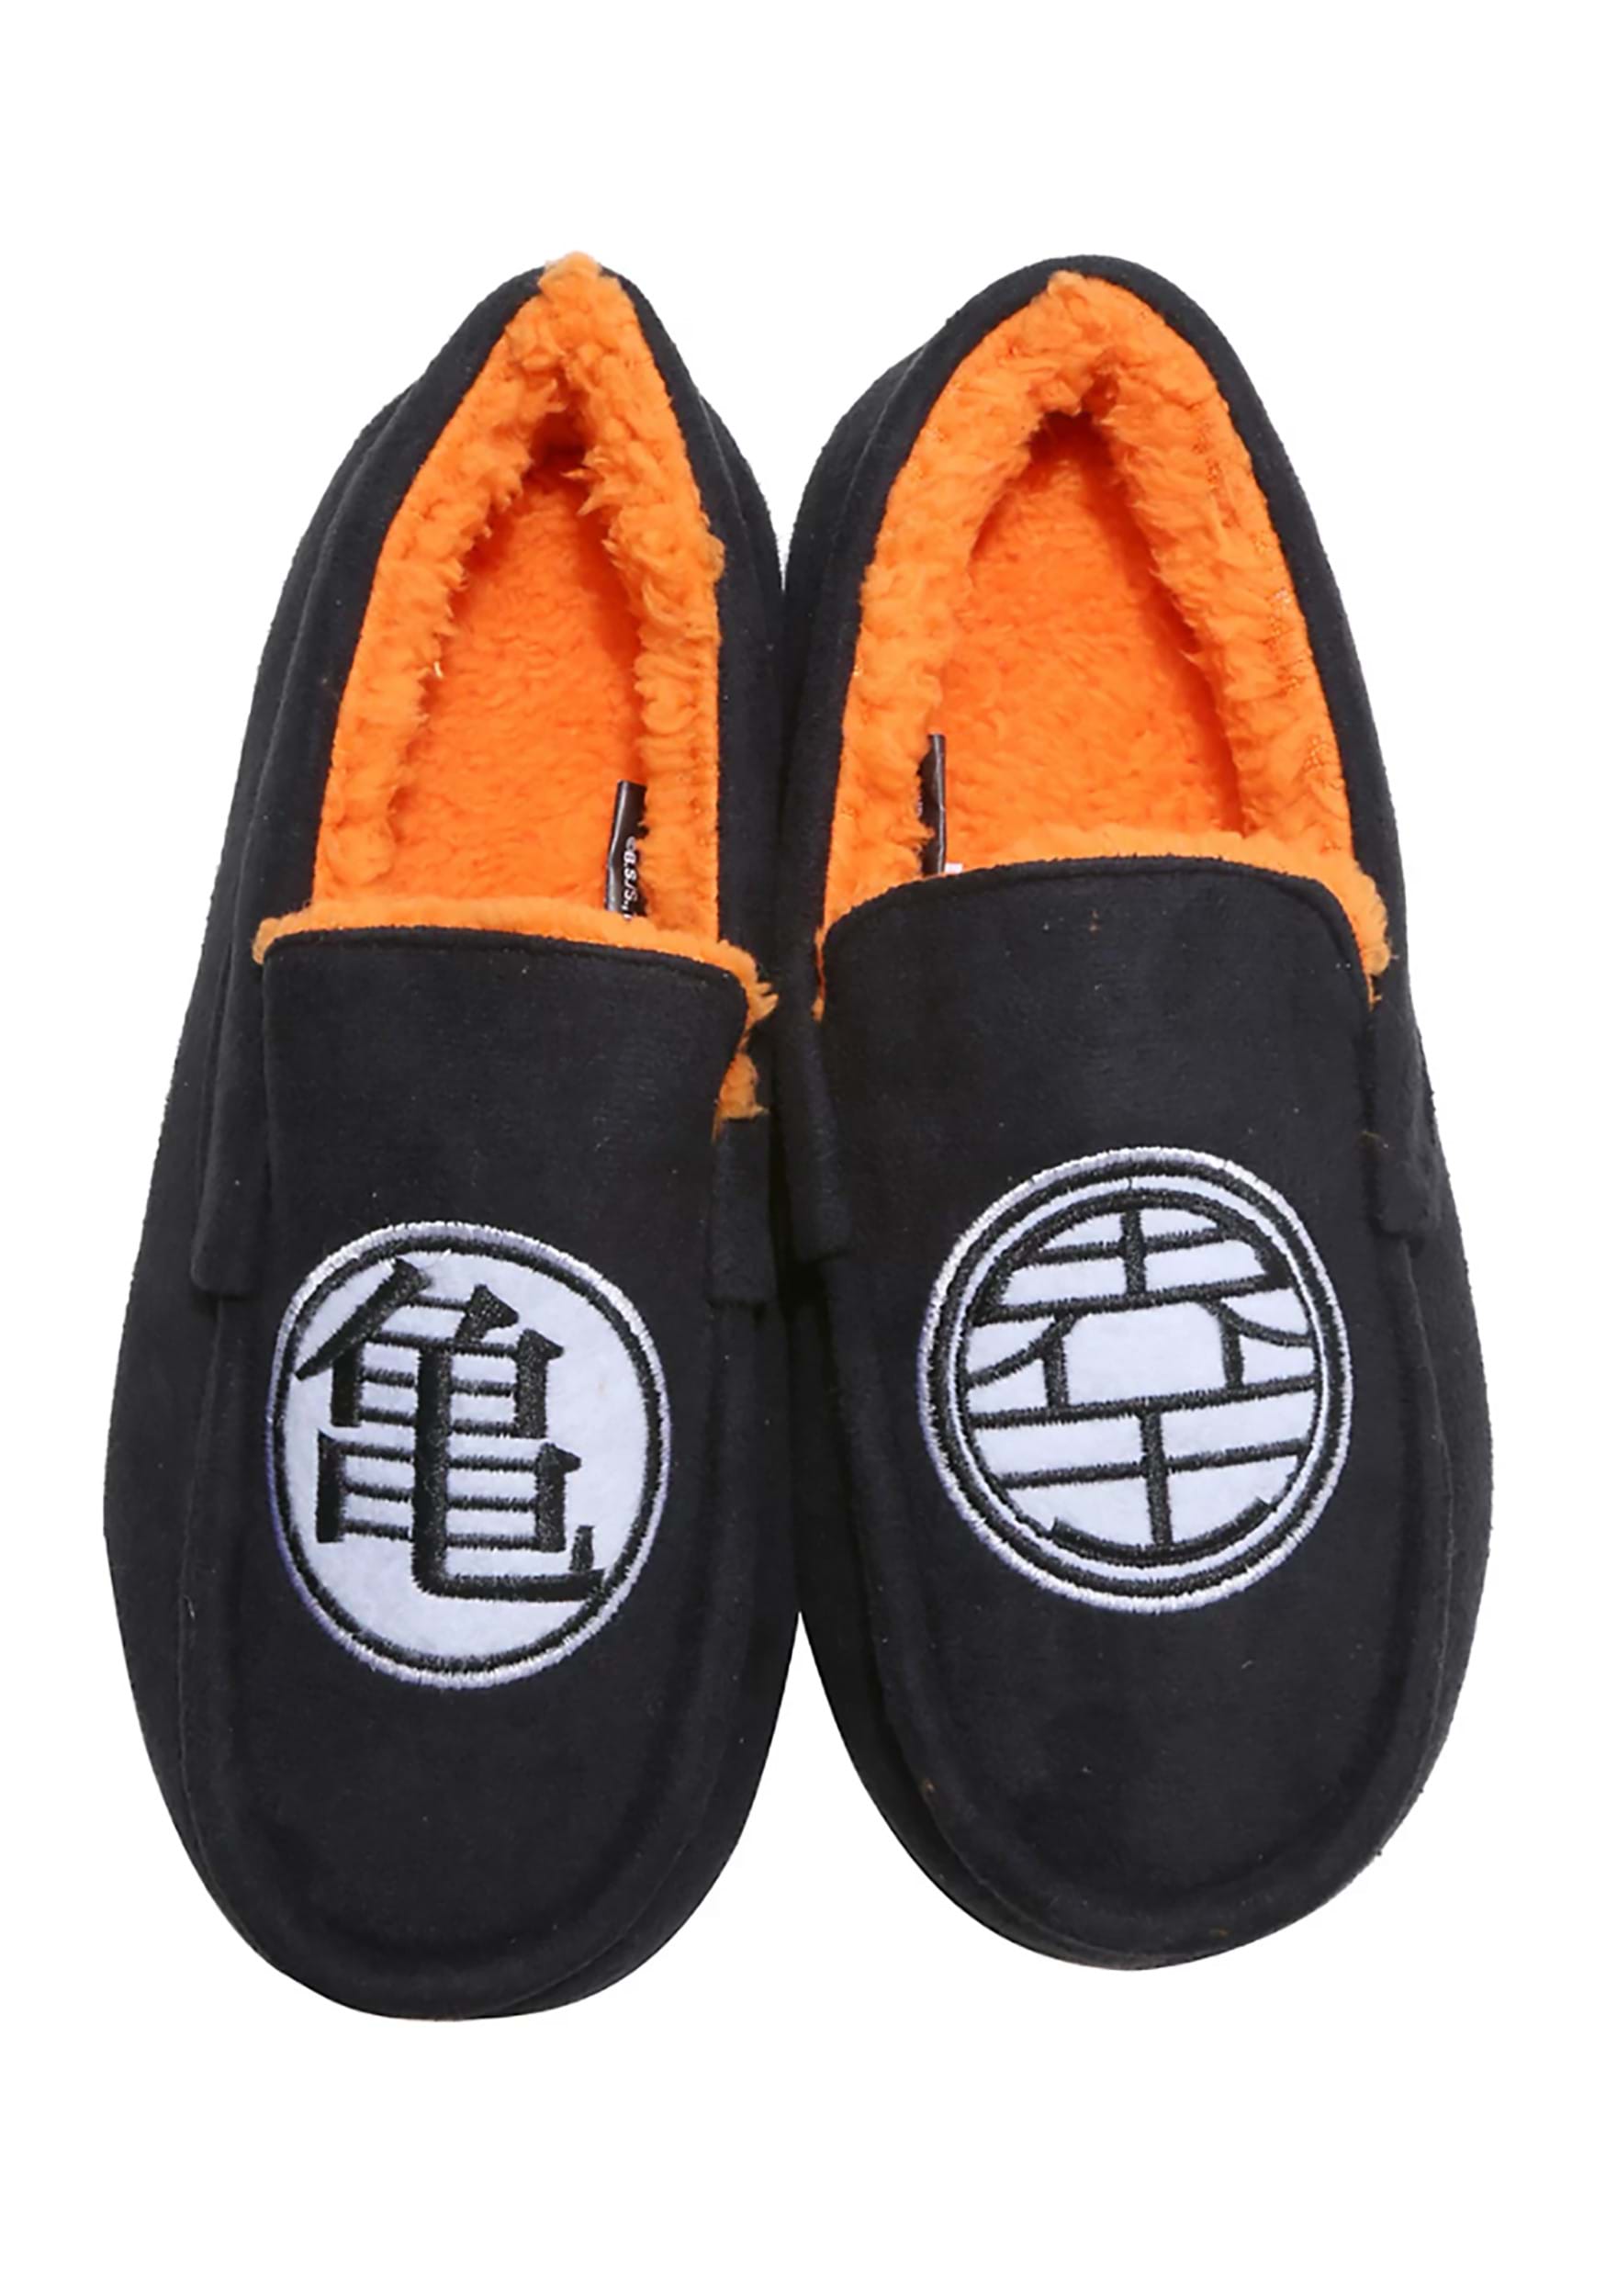 Mens Dragon Ball Z Moccasin Slippers